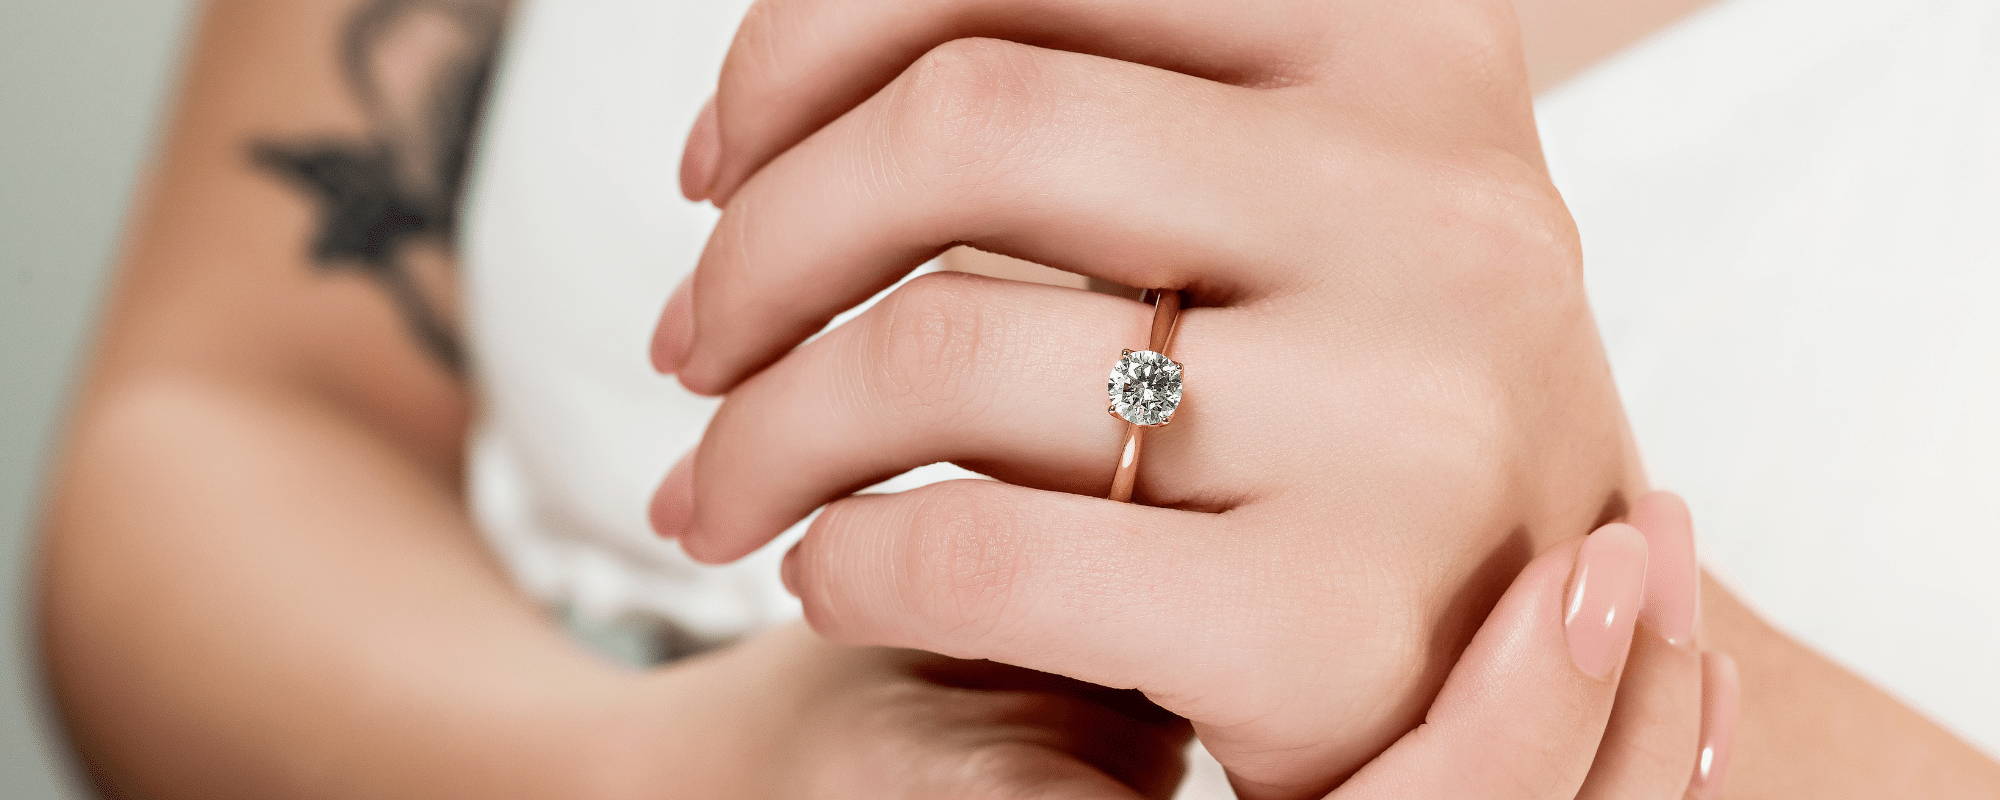 Simple Yet Unique Engagement Rings for Women